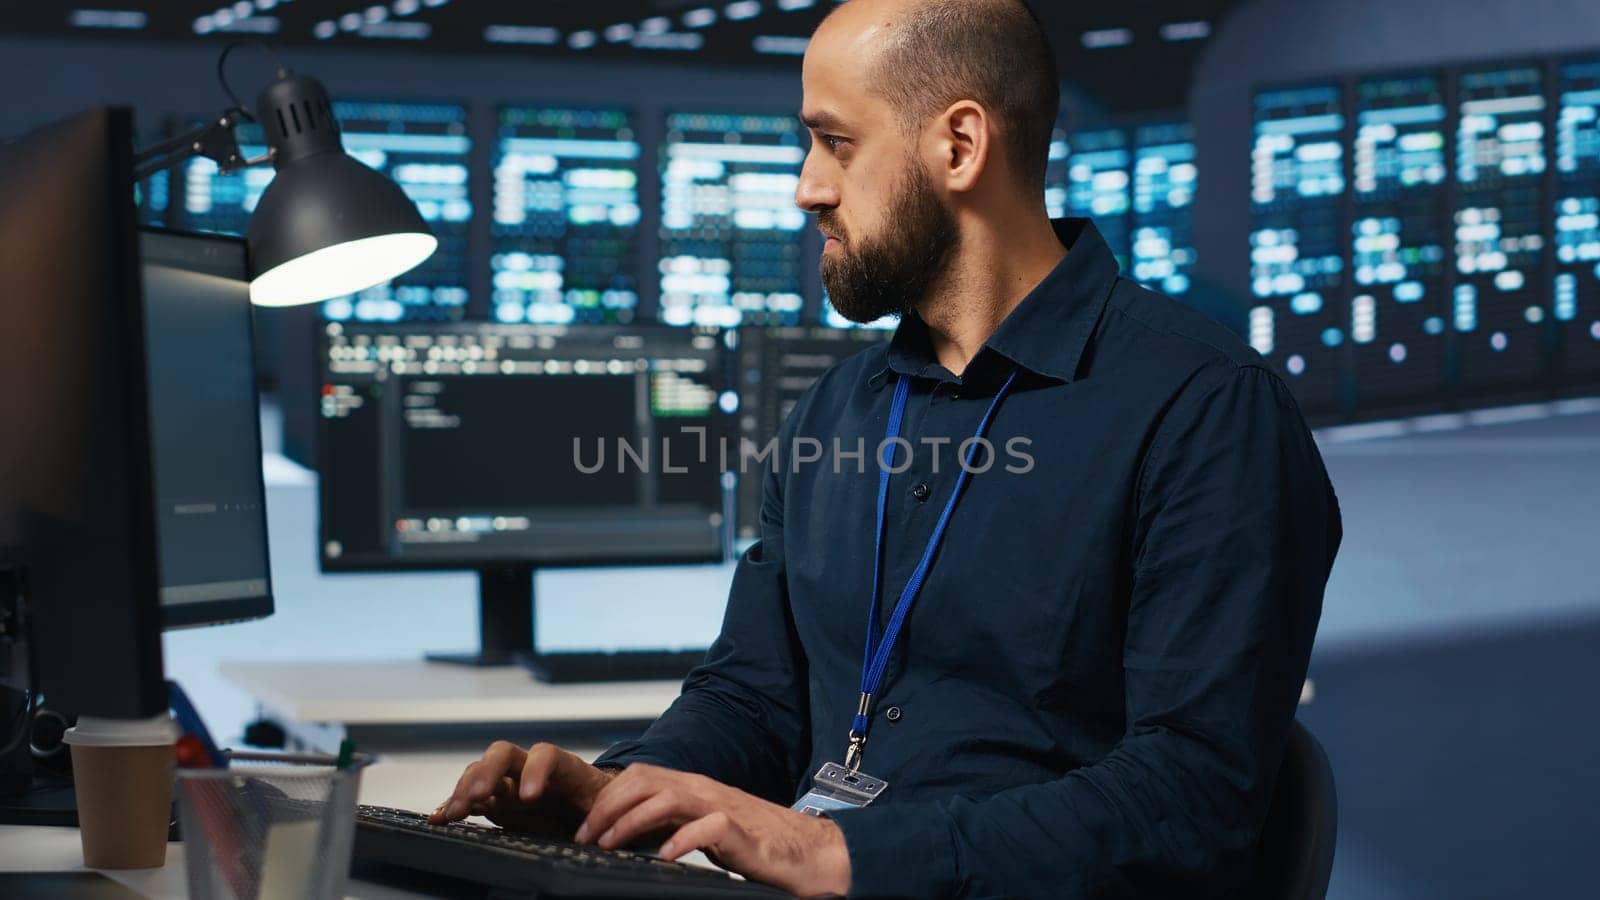 Computer scientist overseeing server hub, typing code on PC, troubleshooting rigs. Software professional doing maintenance on supercomputers, networking systems and storage arrays